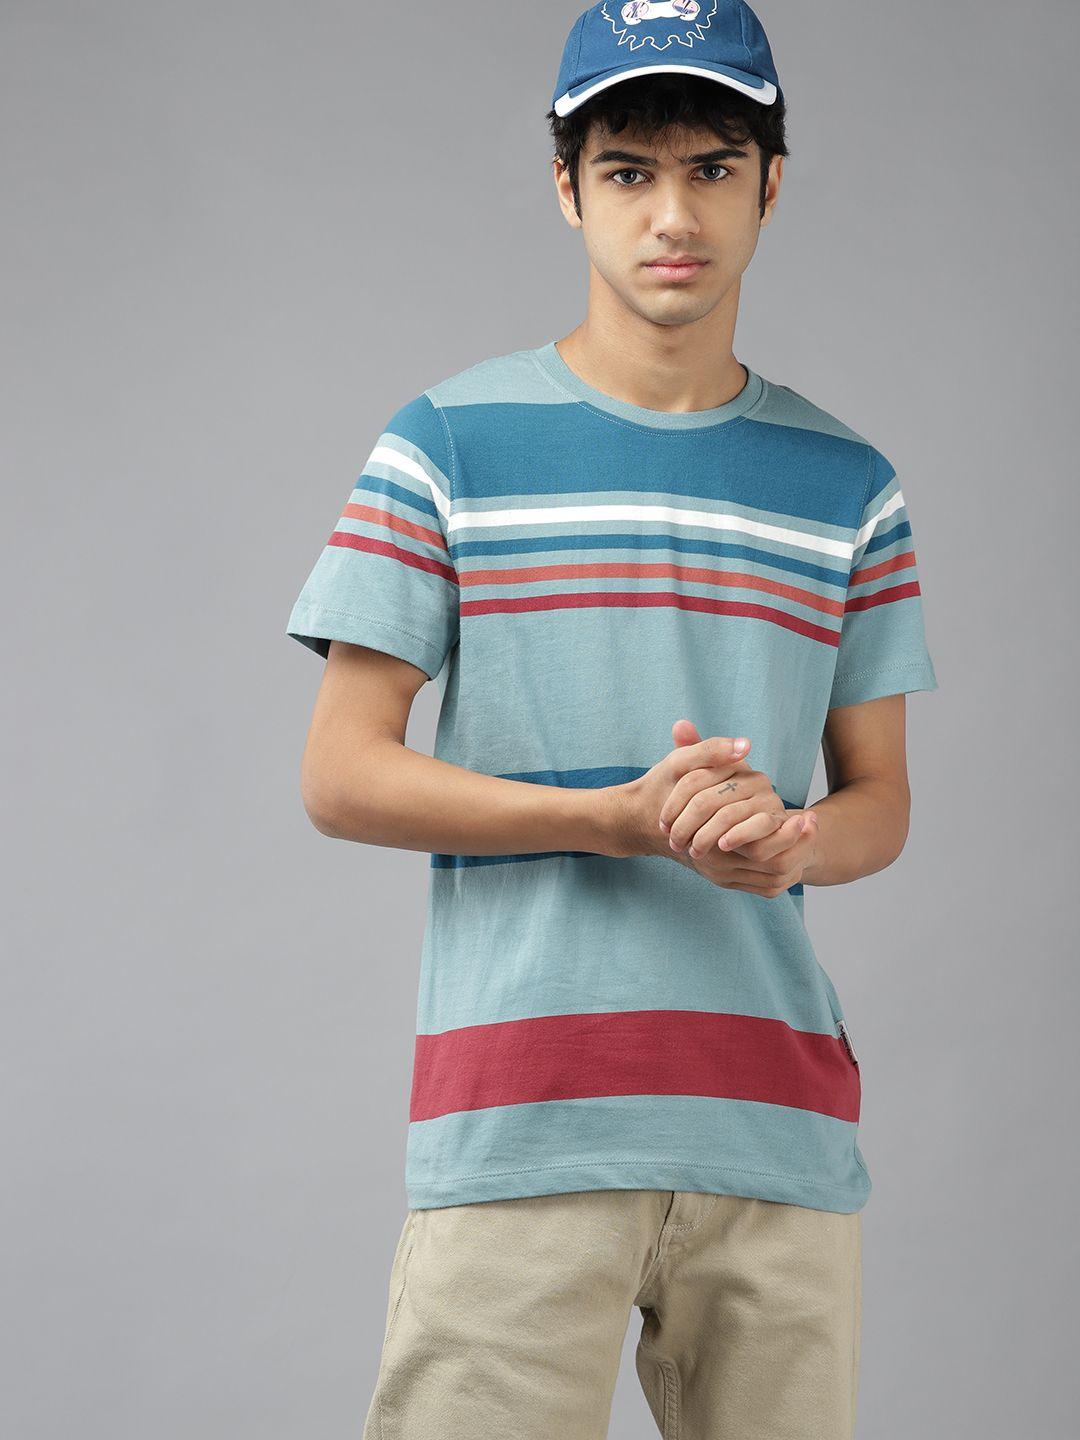 uth by roadster boys green & blue striped pure cotton t-shirt